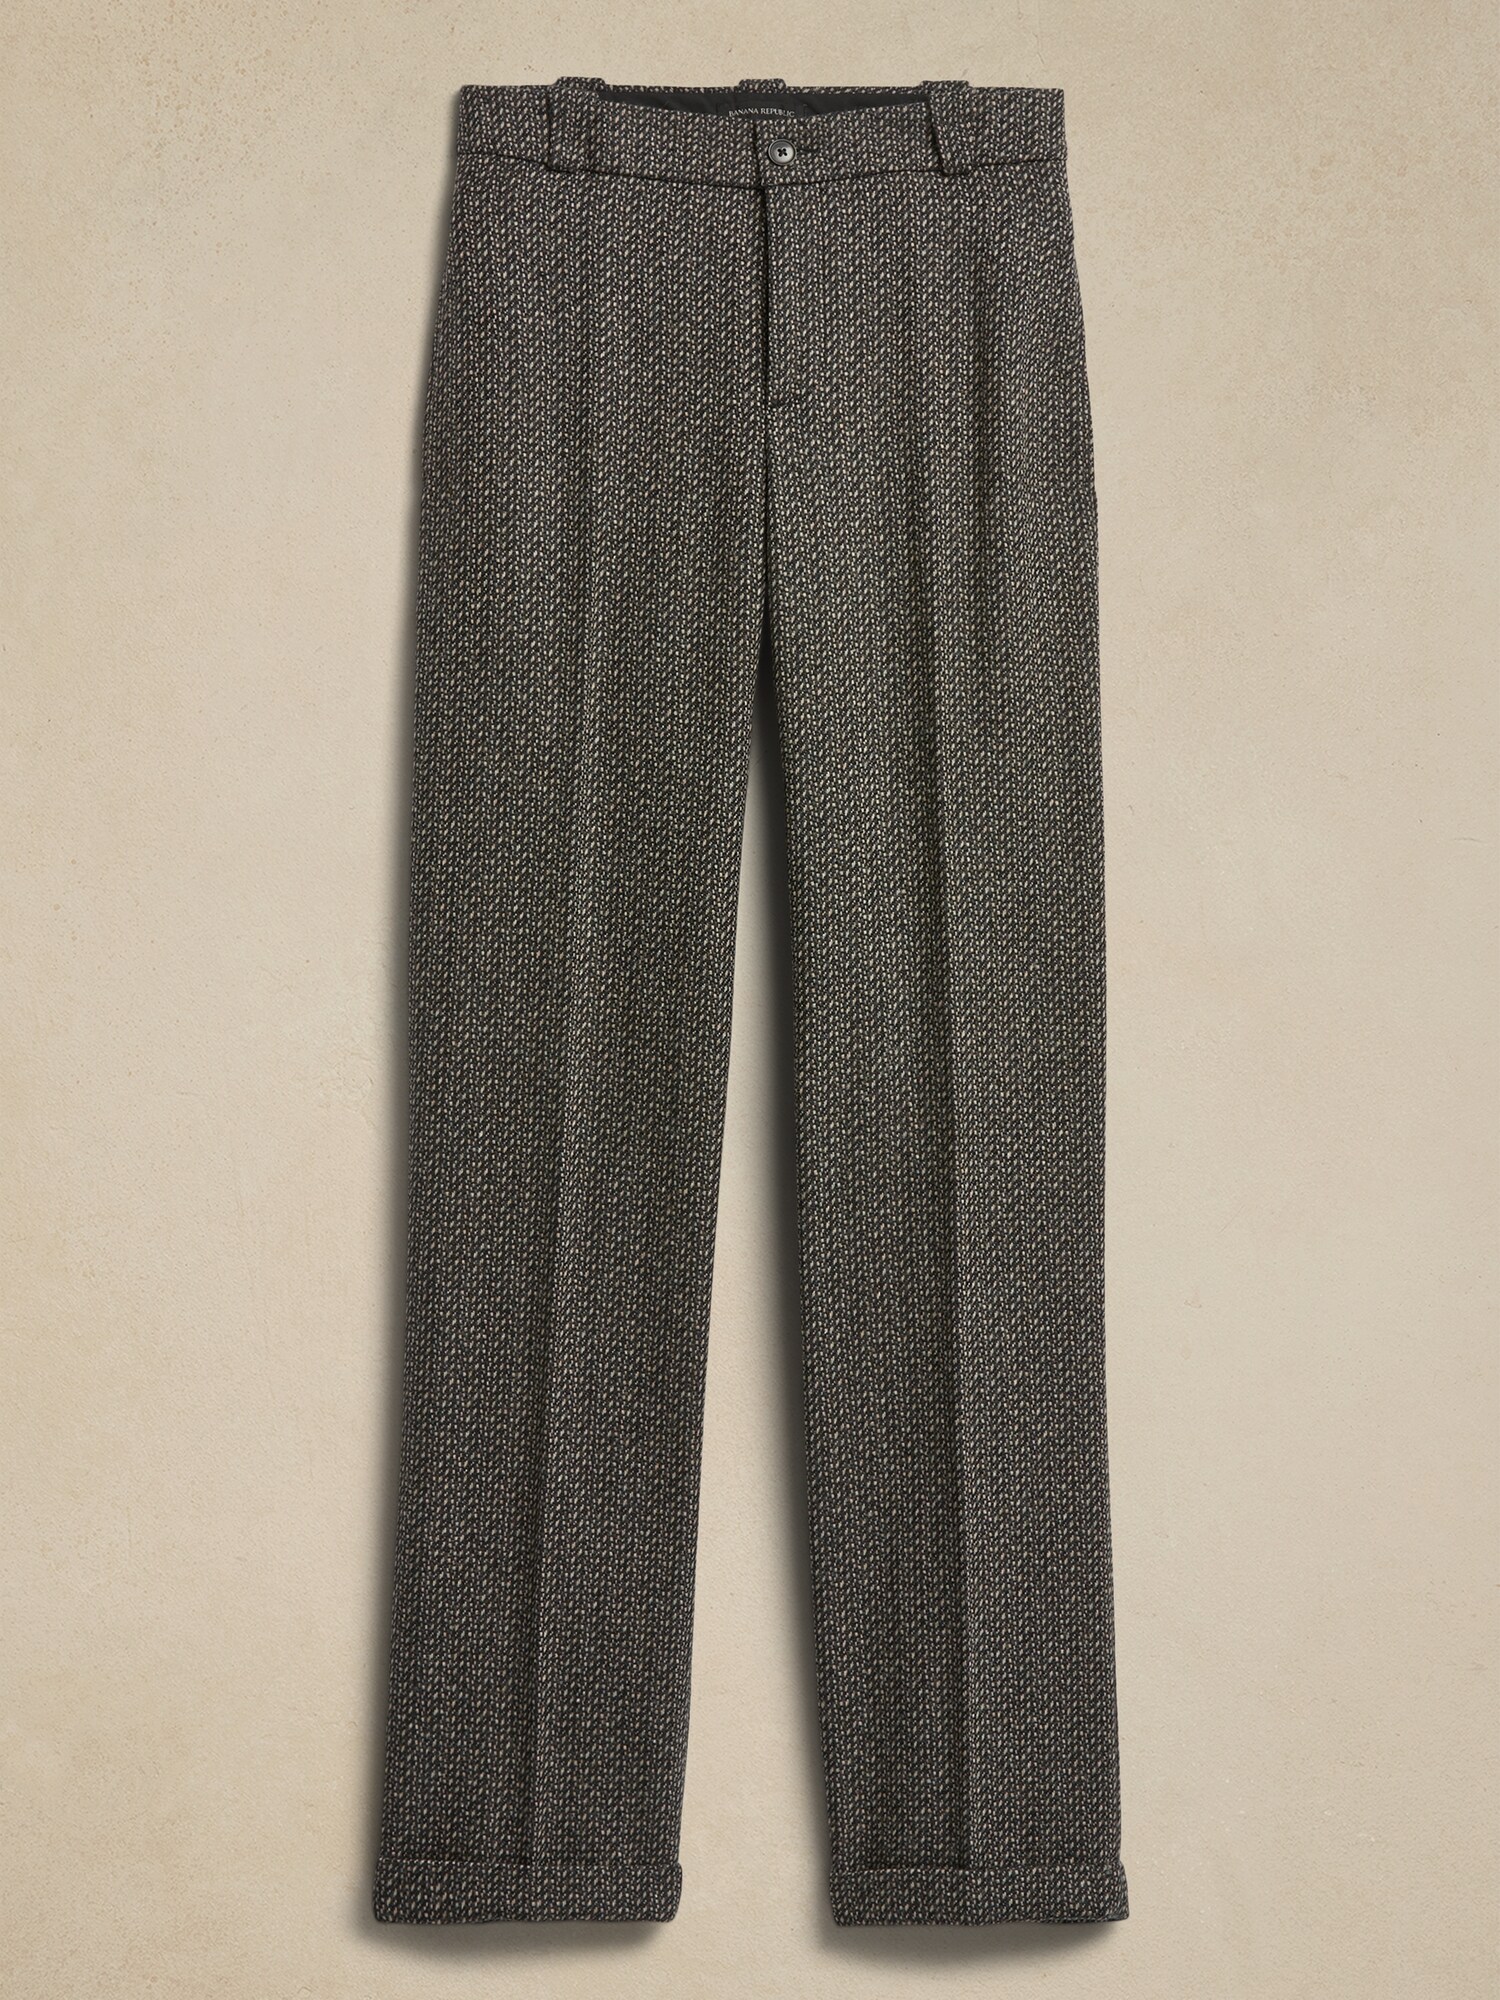 Tweed Pants by Slate & Willow for $25